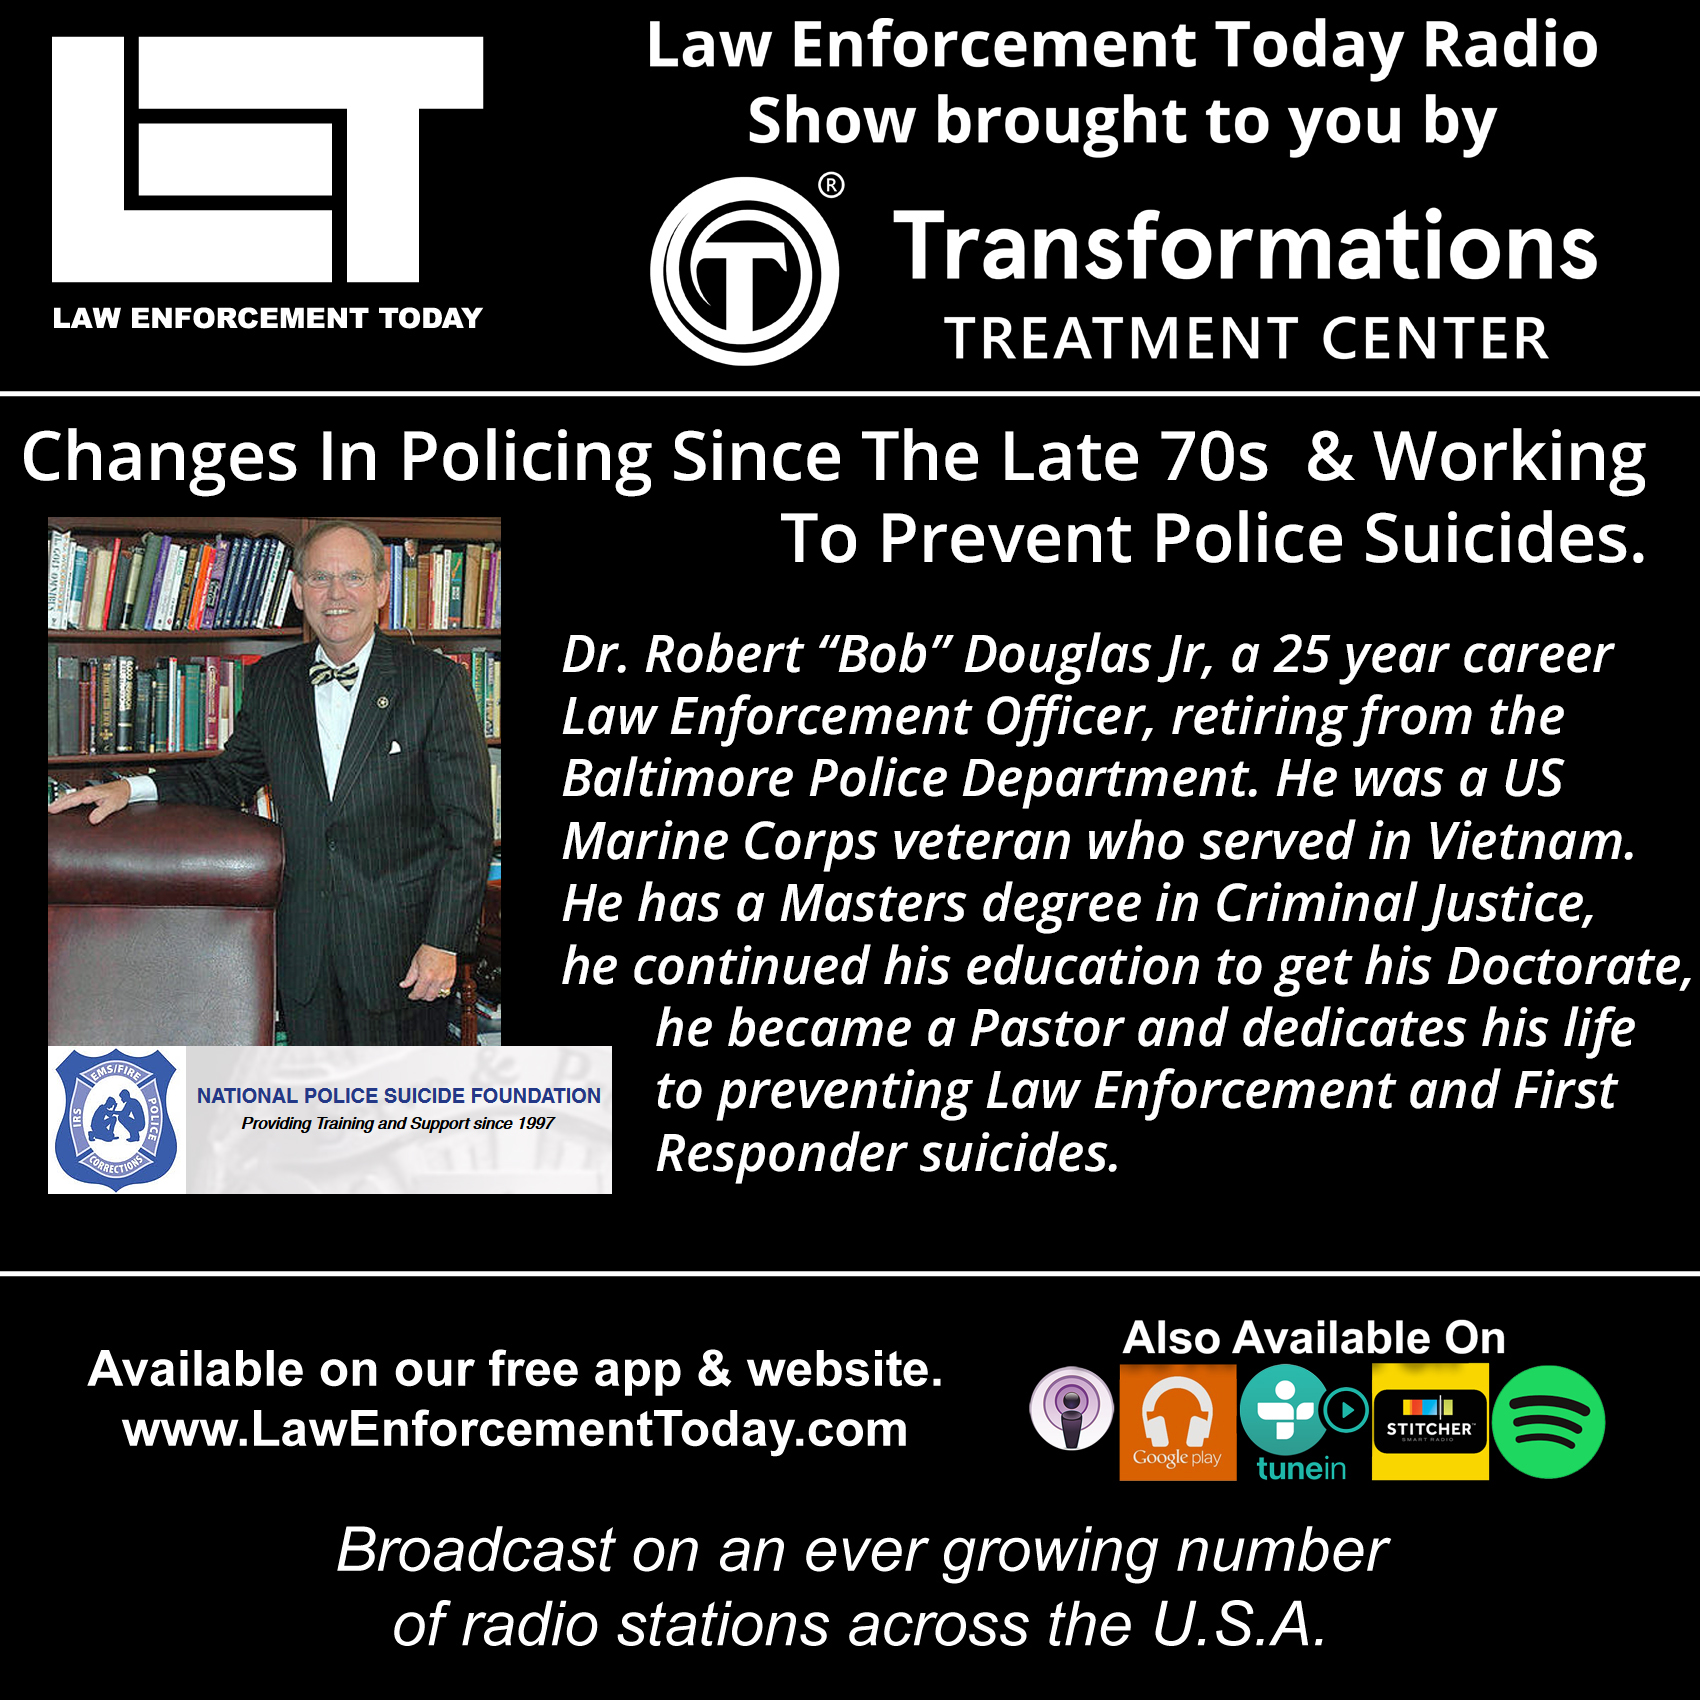 S3E33: Changes In Policing Since The Late 70s and Preventing Law Enforcement Suicides